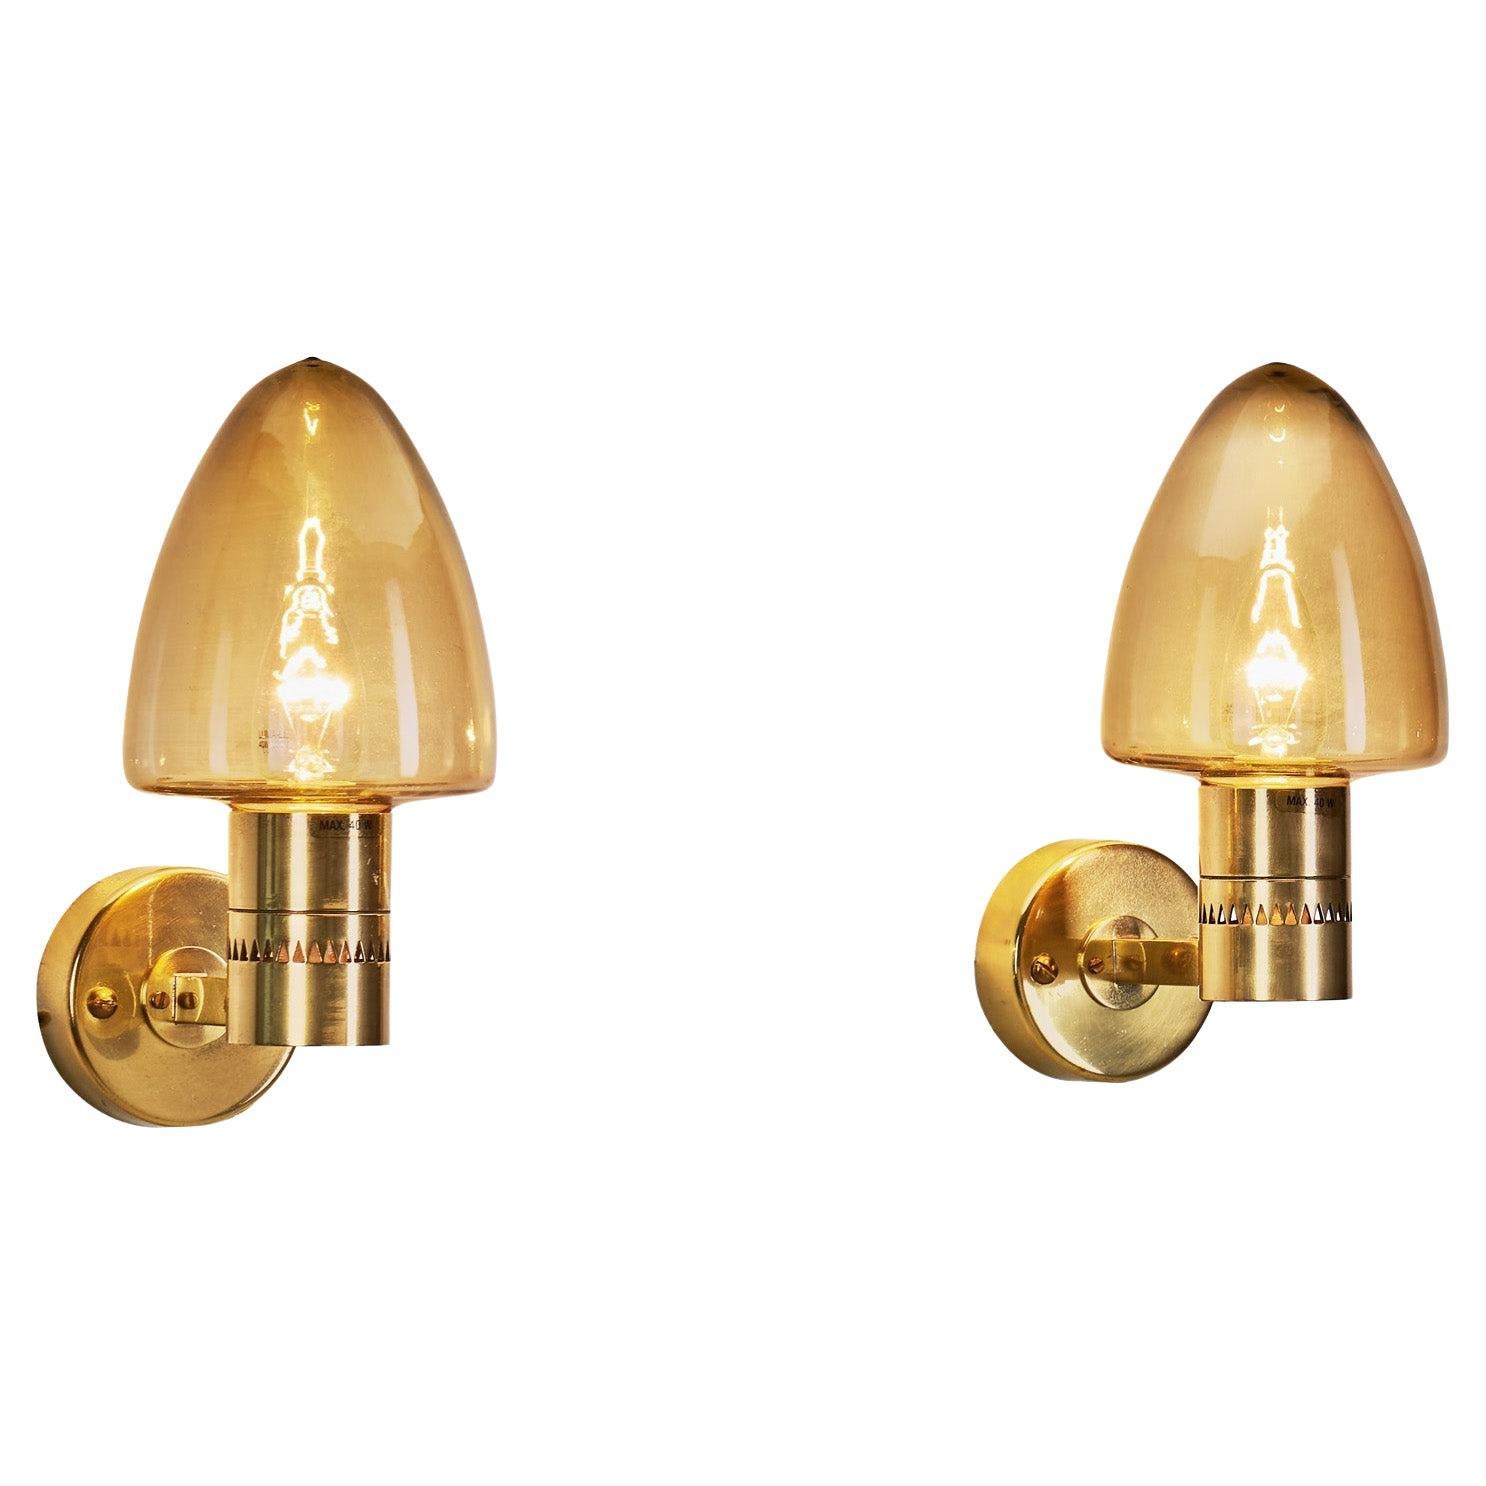 Pair of "V-220" Brass Wall Sconces by Hans-Agne Jakobsson, Sweden 1960s